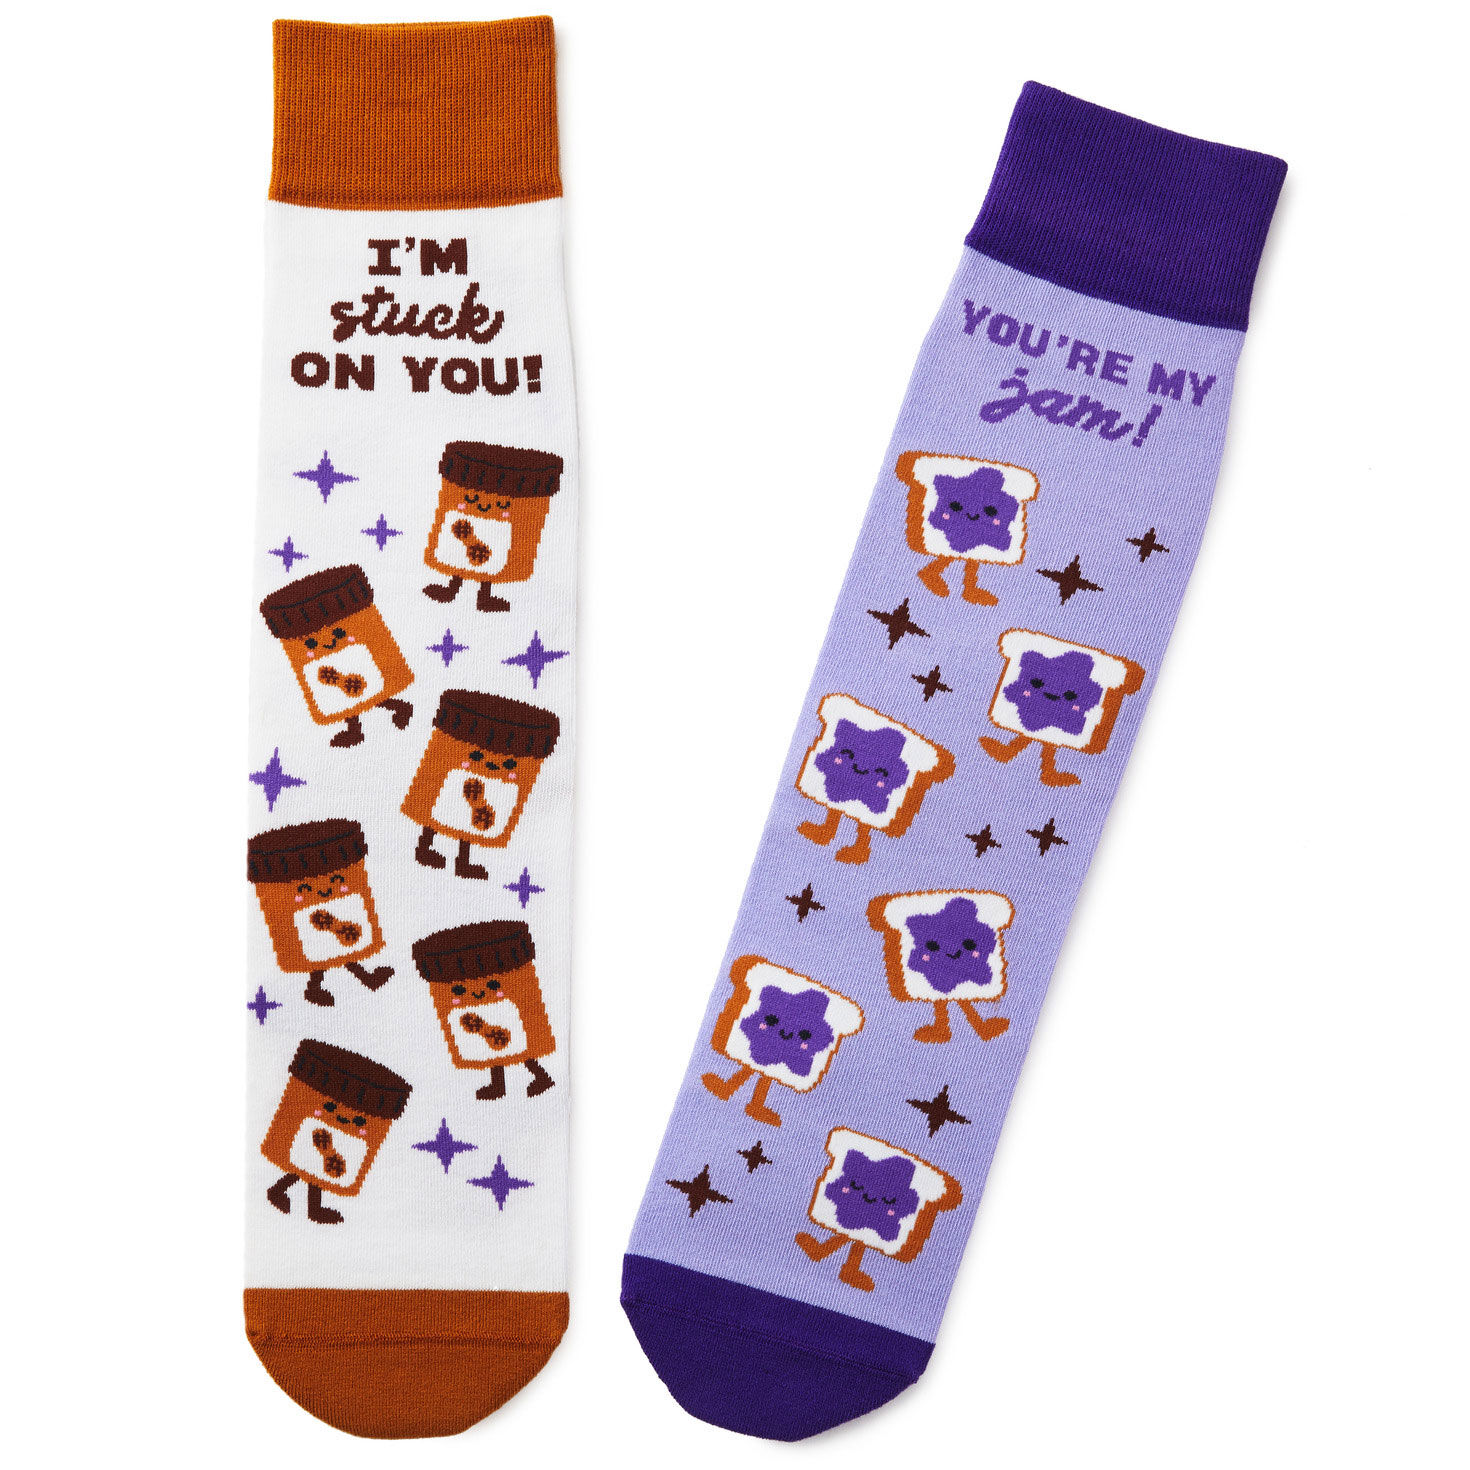 Peanut Butter and Jelly Better Together Funny Crew Socks for only USD 12.99 | Hallmark